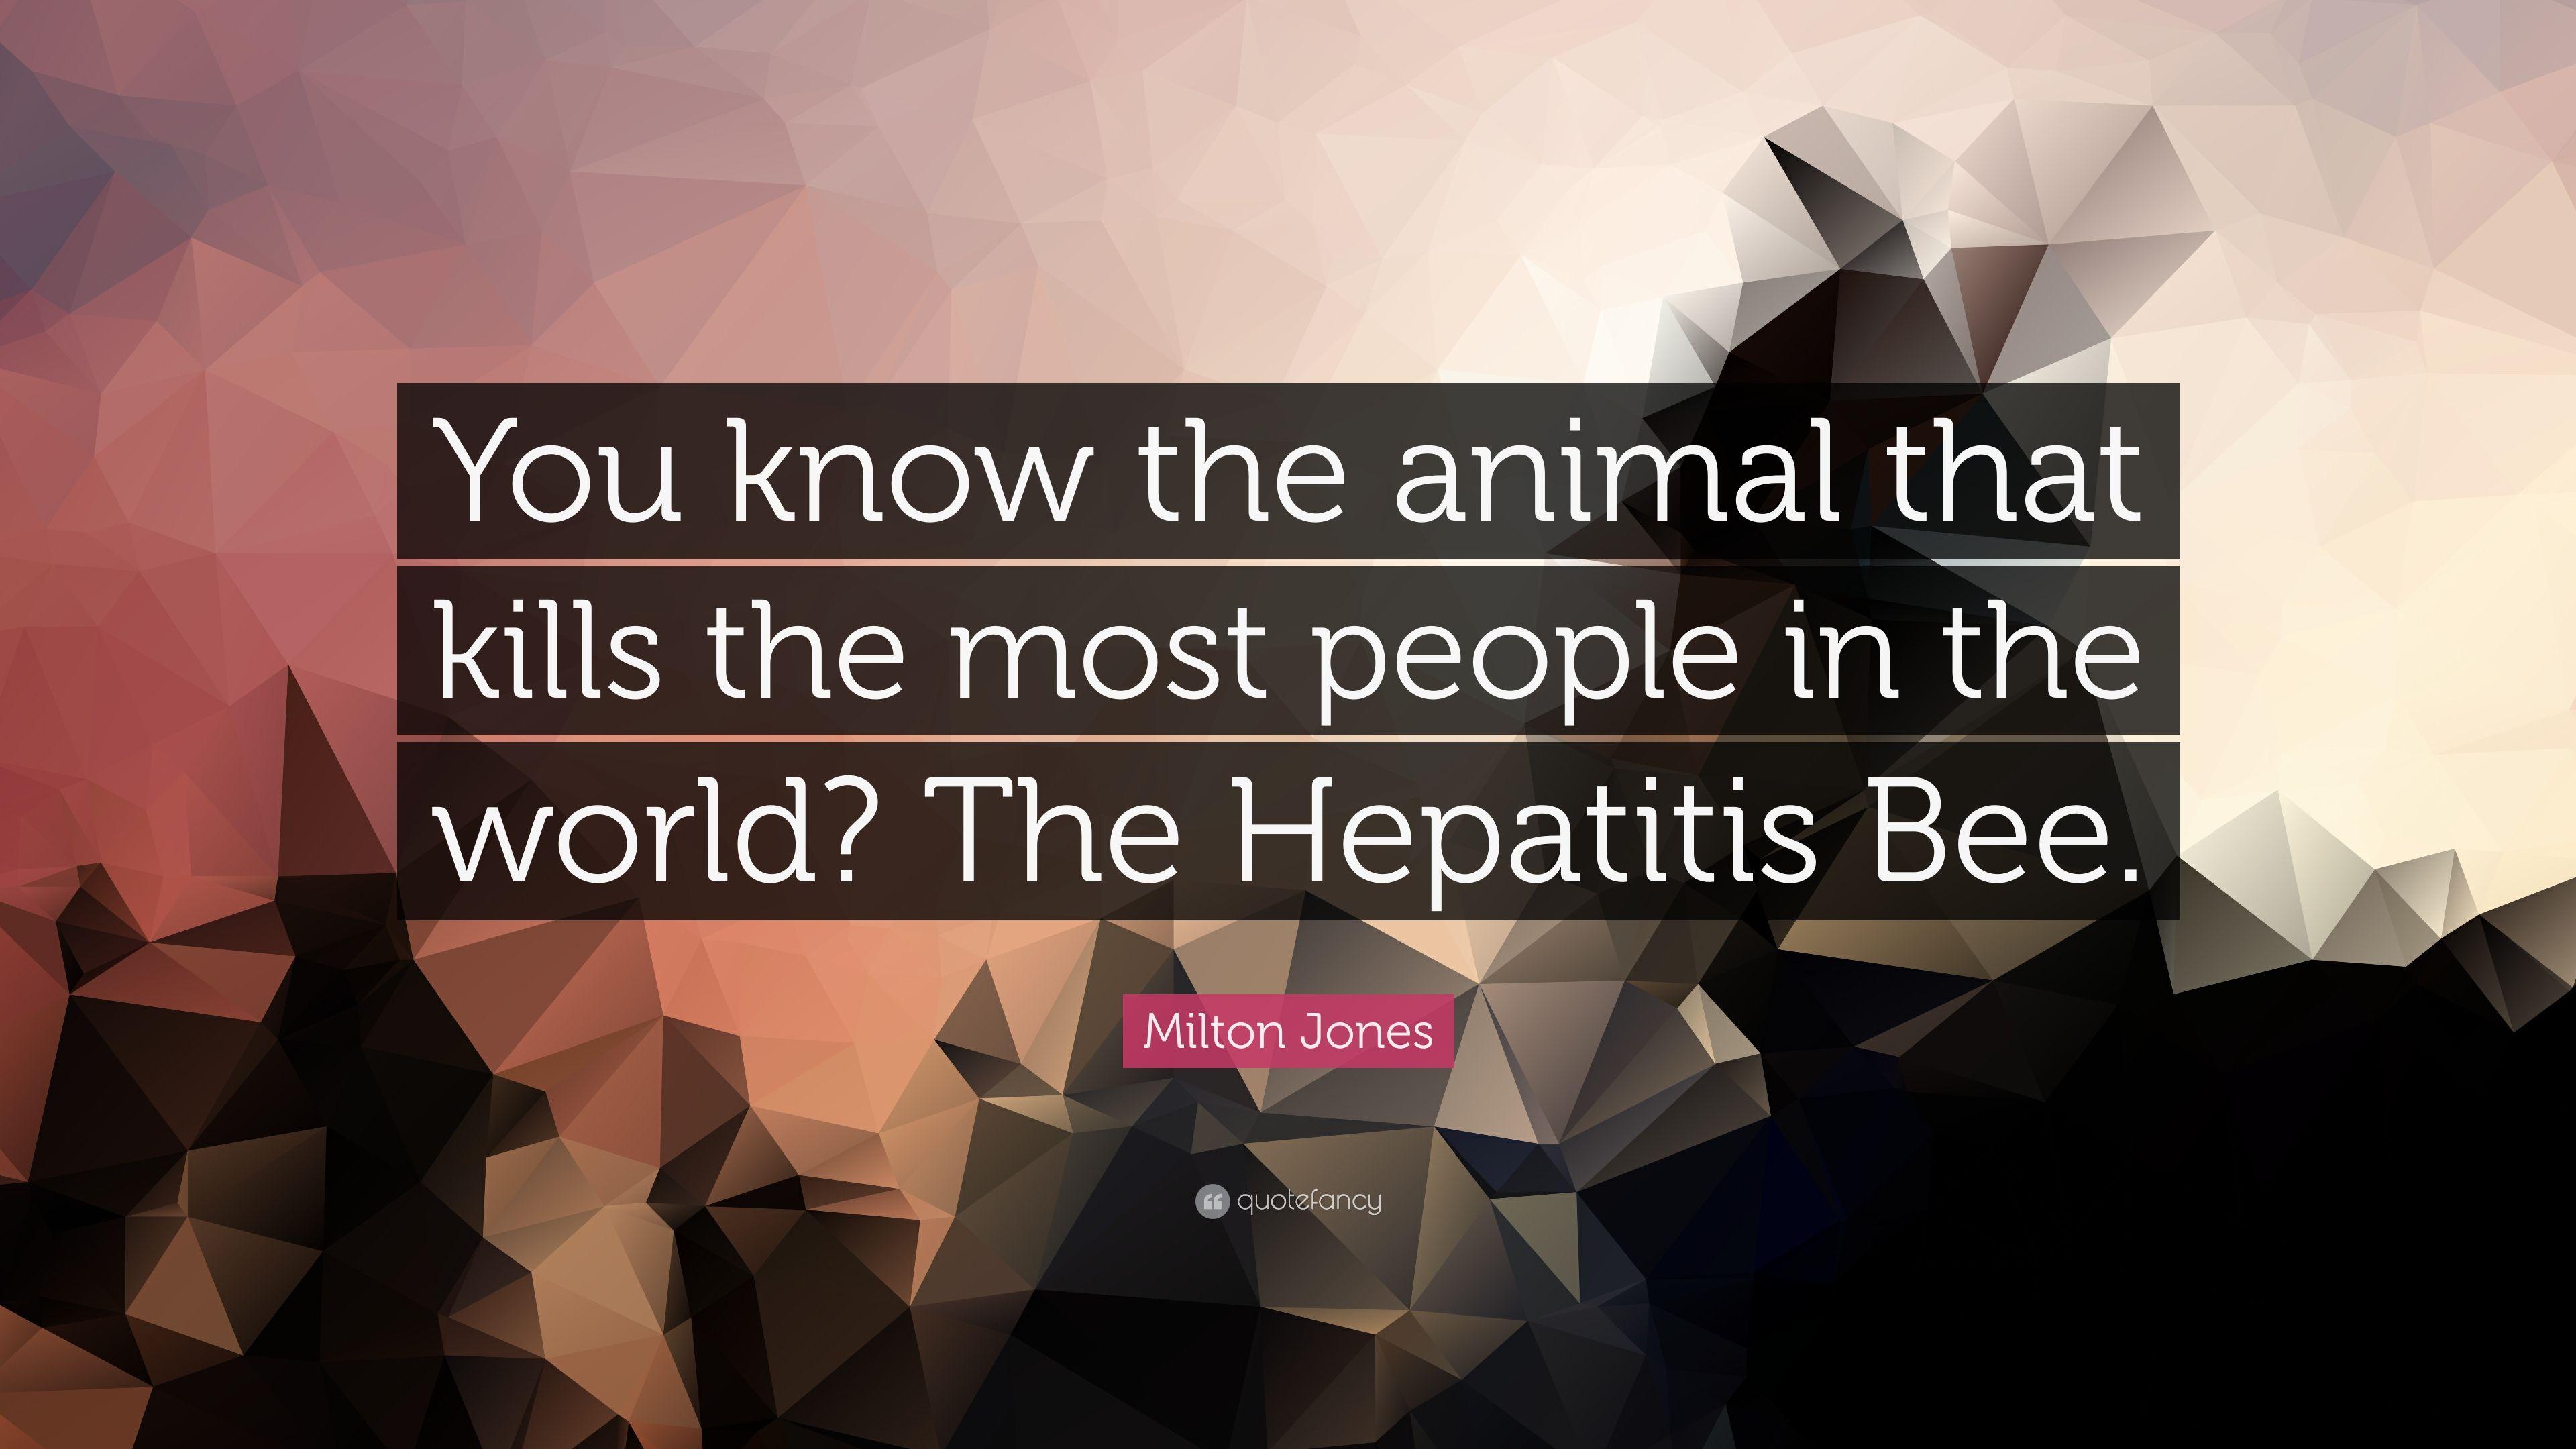 Milton Jones Quote: “You know the animal that kills the most people